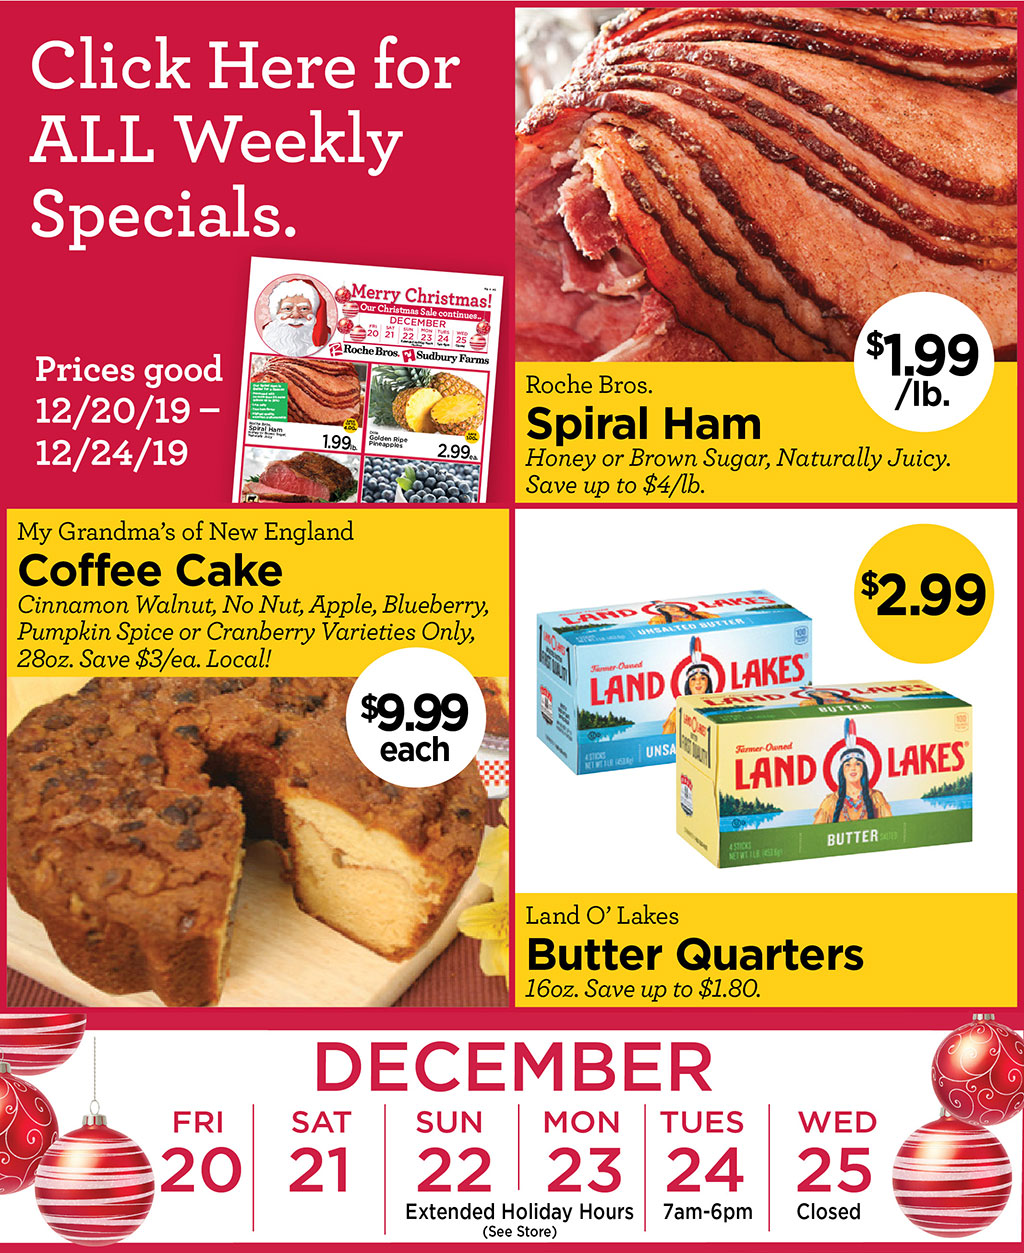 Roche Bros. Spiral Ham $1.99/lb. Honey or Brown Sugar, Naturally Juicy. Save up to $4/lb., My Grandmas of New England Coffee Cake $9.99 each Cinnamon Walnut, No Nut, Apple, Blueberry, Pumpkin Spice or Cranberry Varieties Only, 28oz. Save $3/ea. Local!, Land O Lakes Butter Quarters $2.99 16oz. Save up to $1.80.  HOLIDAY HOURS NOTE: 12/22 & 23: Extended Holiday Hours (See Store). 12/24 7am-6pm. 12/25 CLOSED Prices good 12/20/19  12/24/19